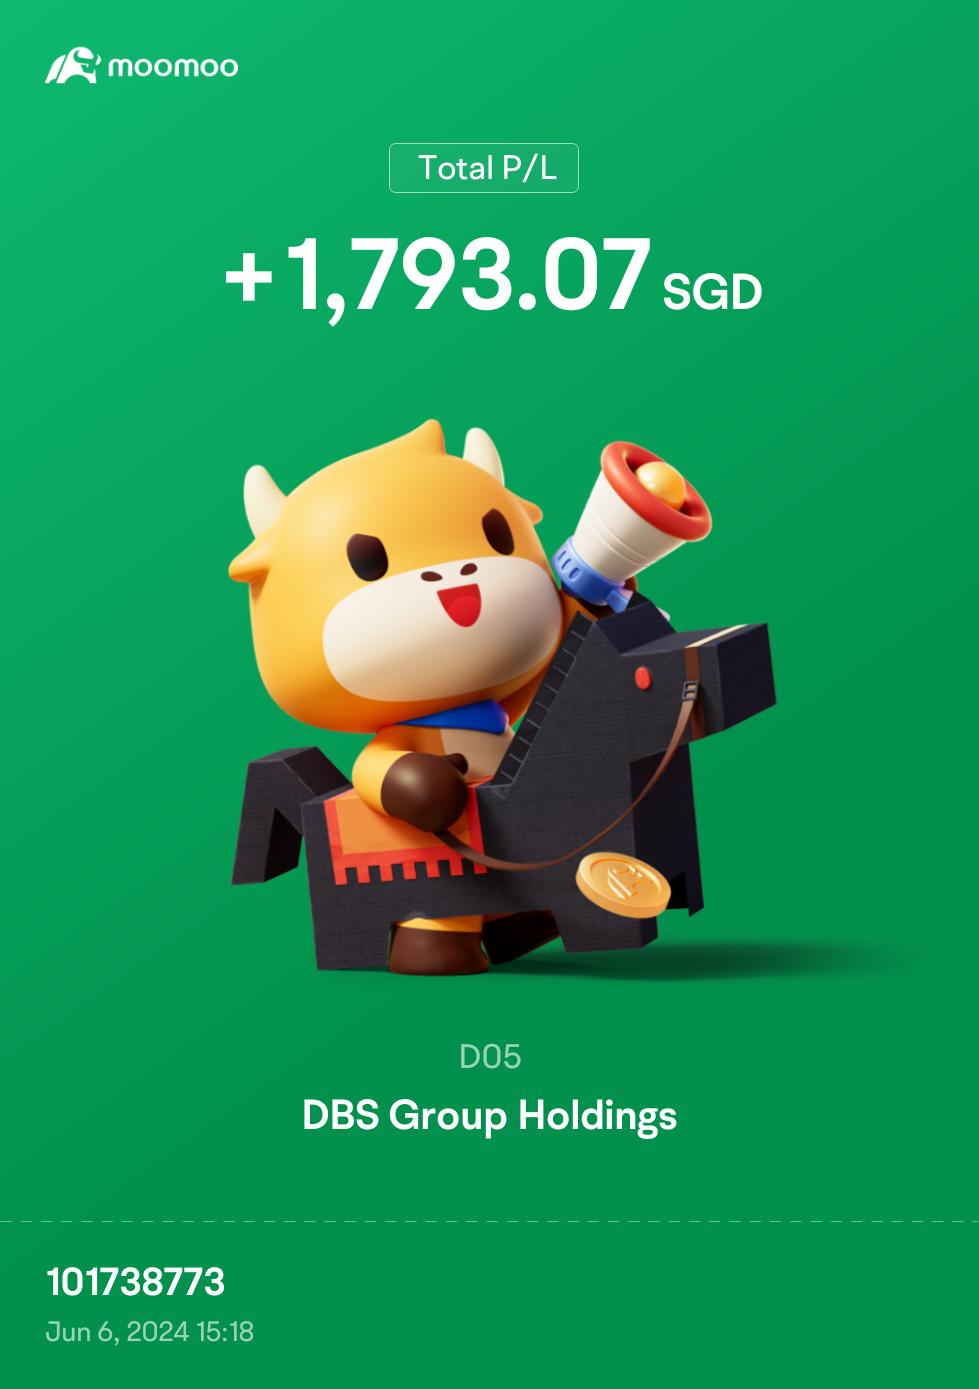 Taking profits for DBS after 9 months.  Did not invest much back then but happy to have collected dividends as well.